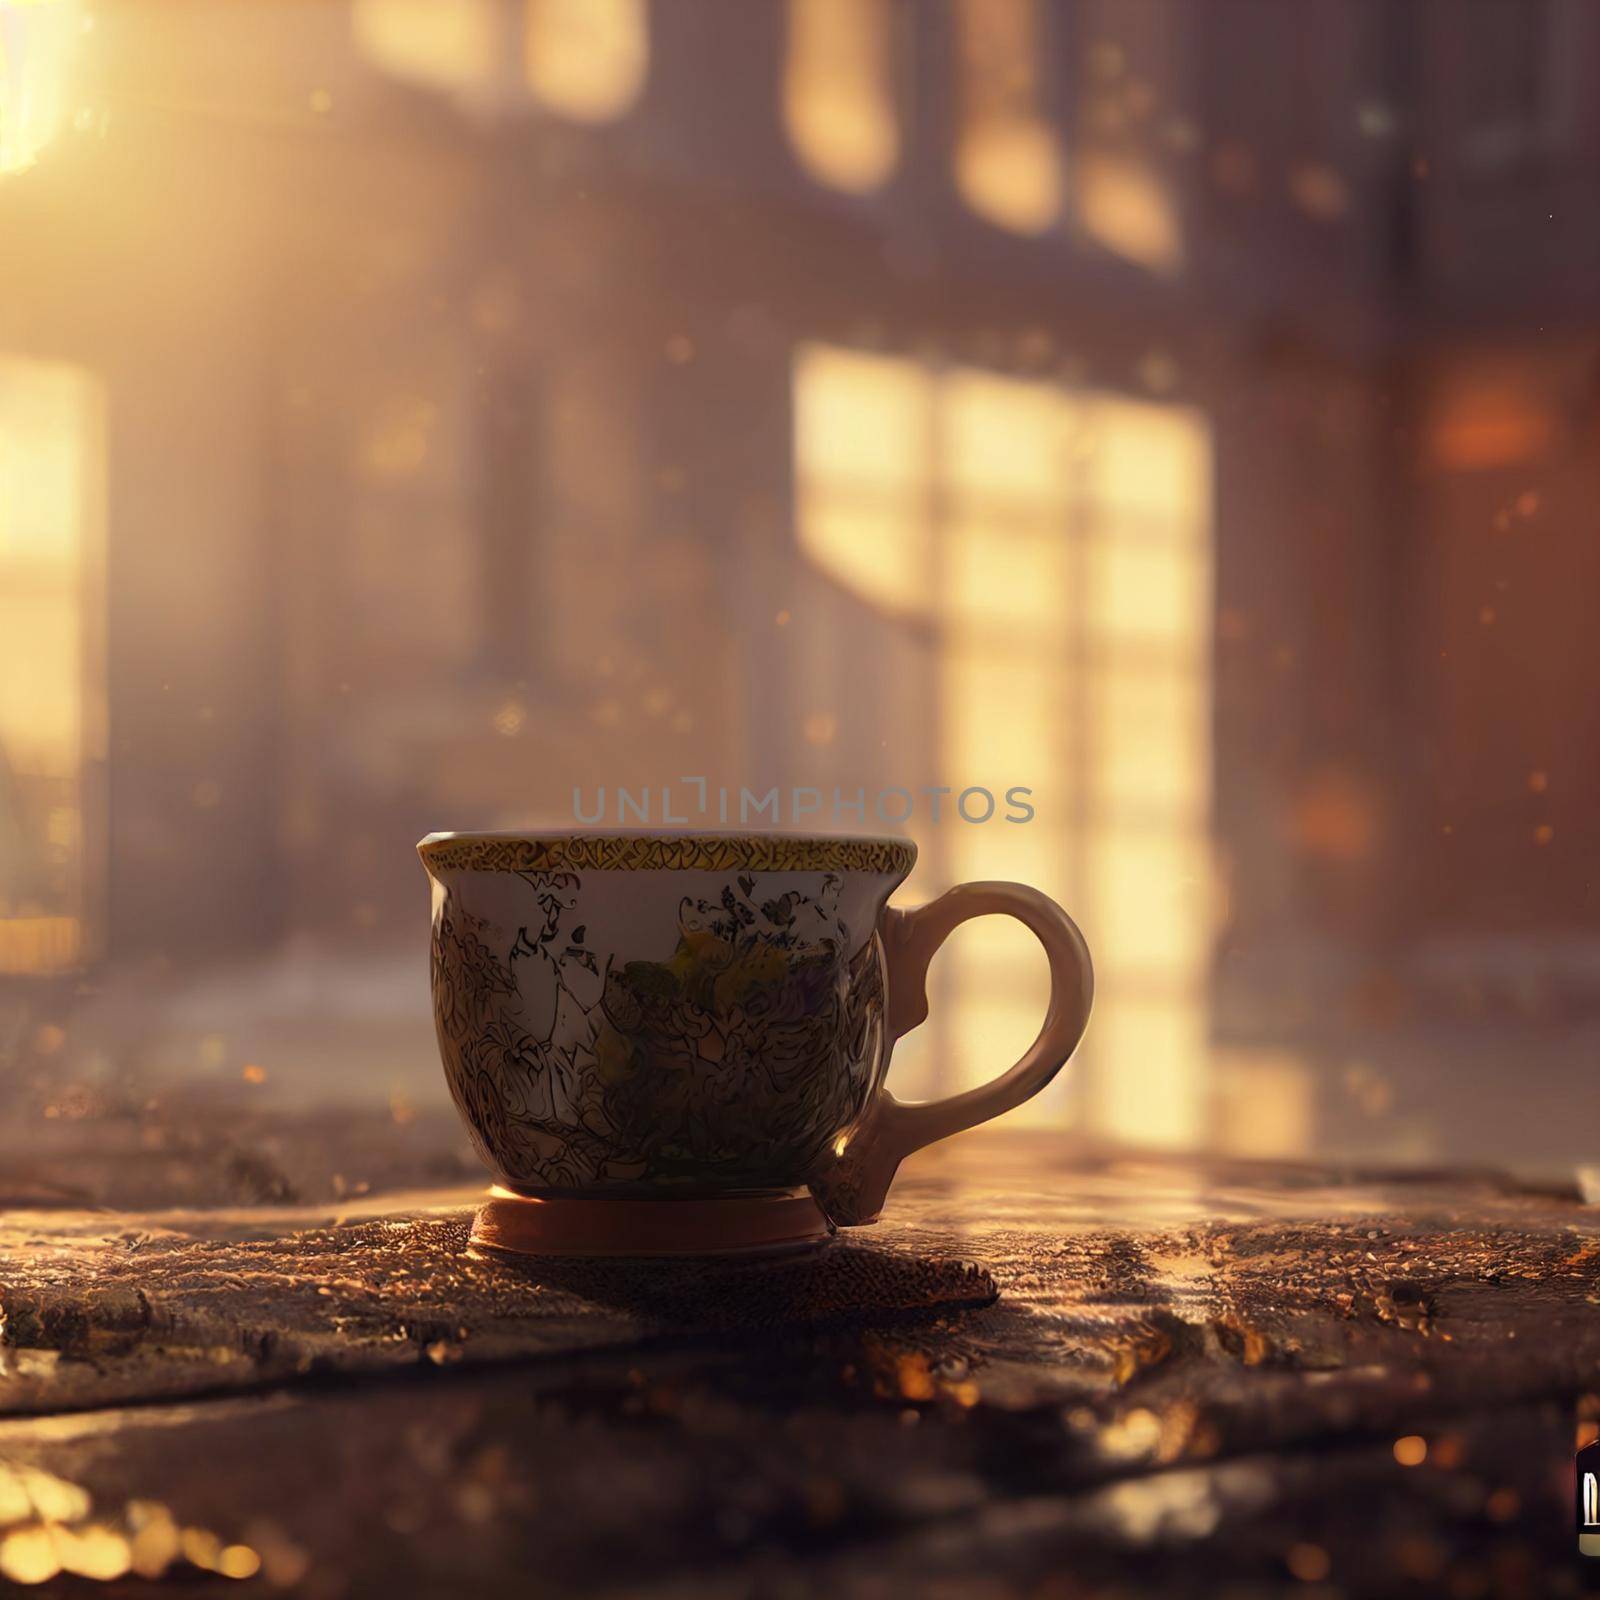 Photorealistic image of a hot cup of tea by NeuroSky